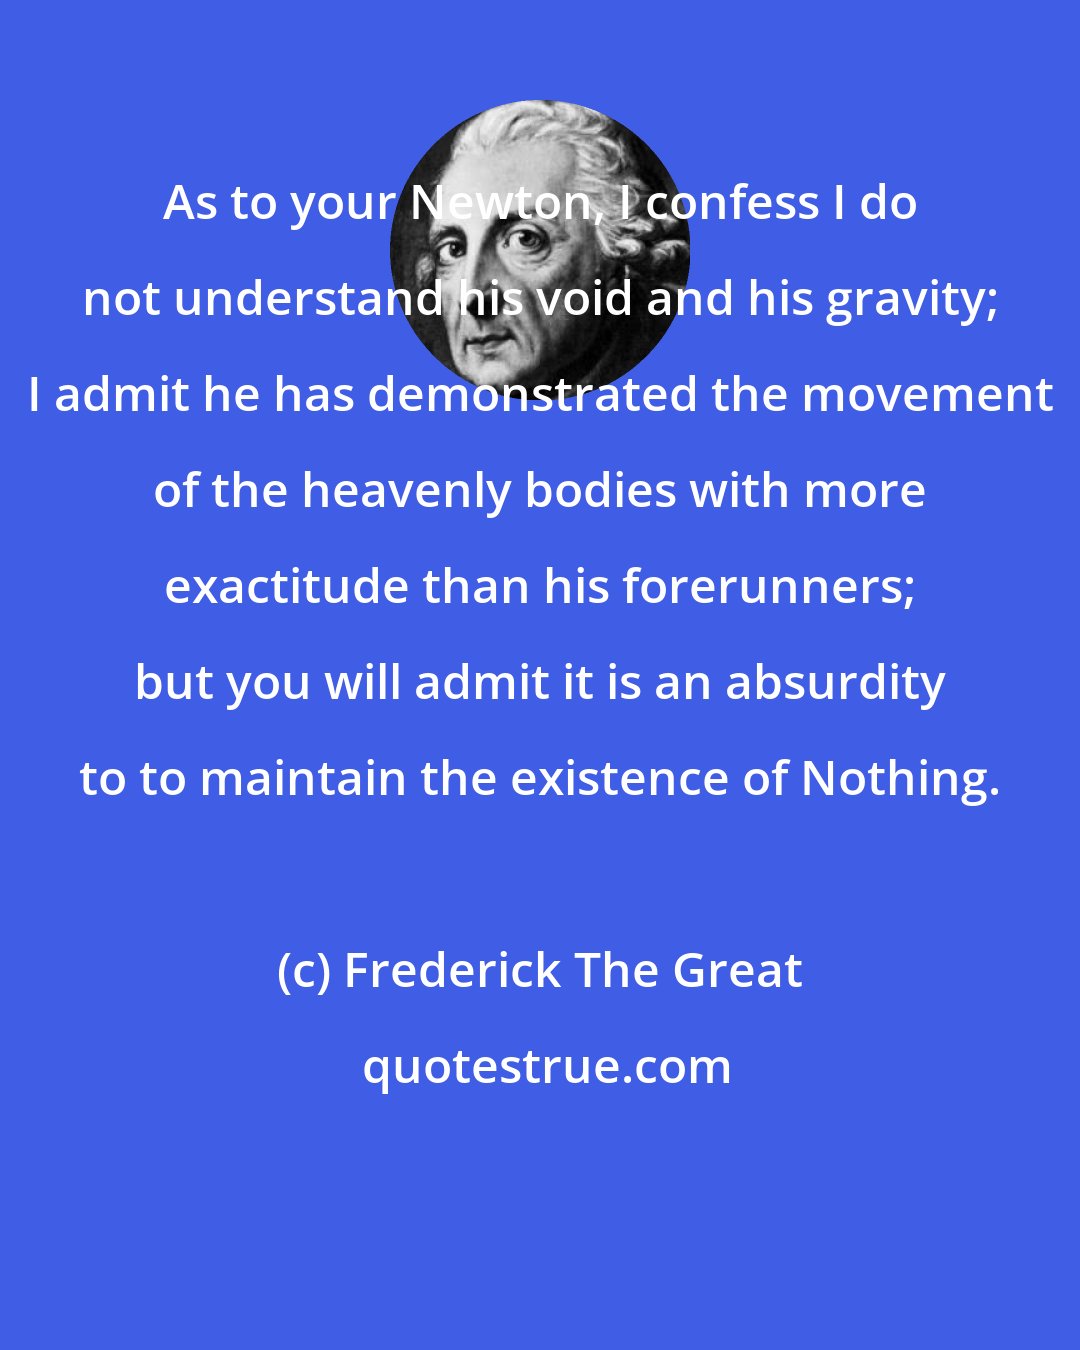 Frederick The Great: As to your Newton, I confess I do not understand his void and his gravity; I admit he has demonstrated the movement of the heavenly bodies with more exactitude than his forerunners; but you will admit it is an absurdity to to maintain the existence of Nothing.